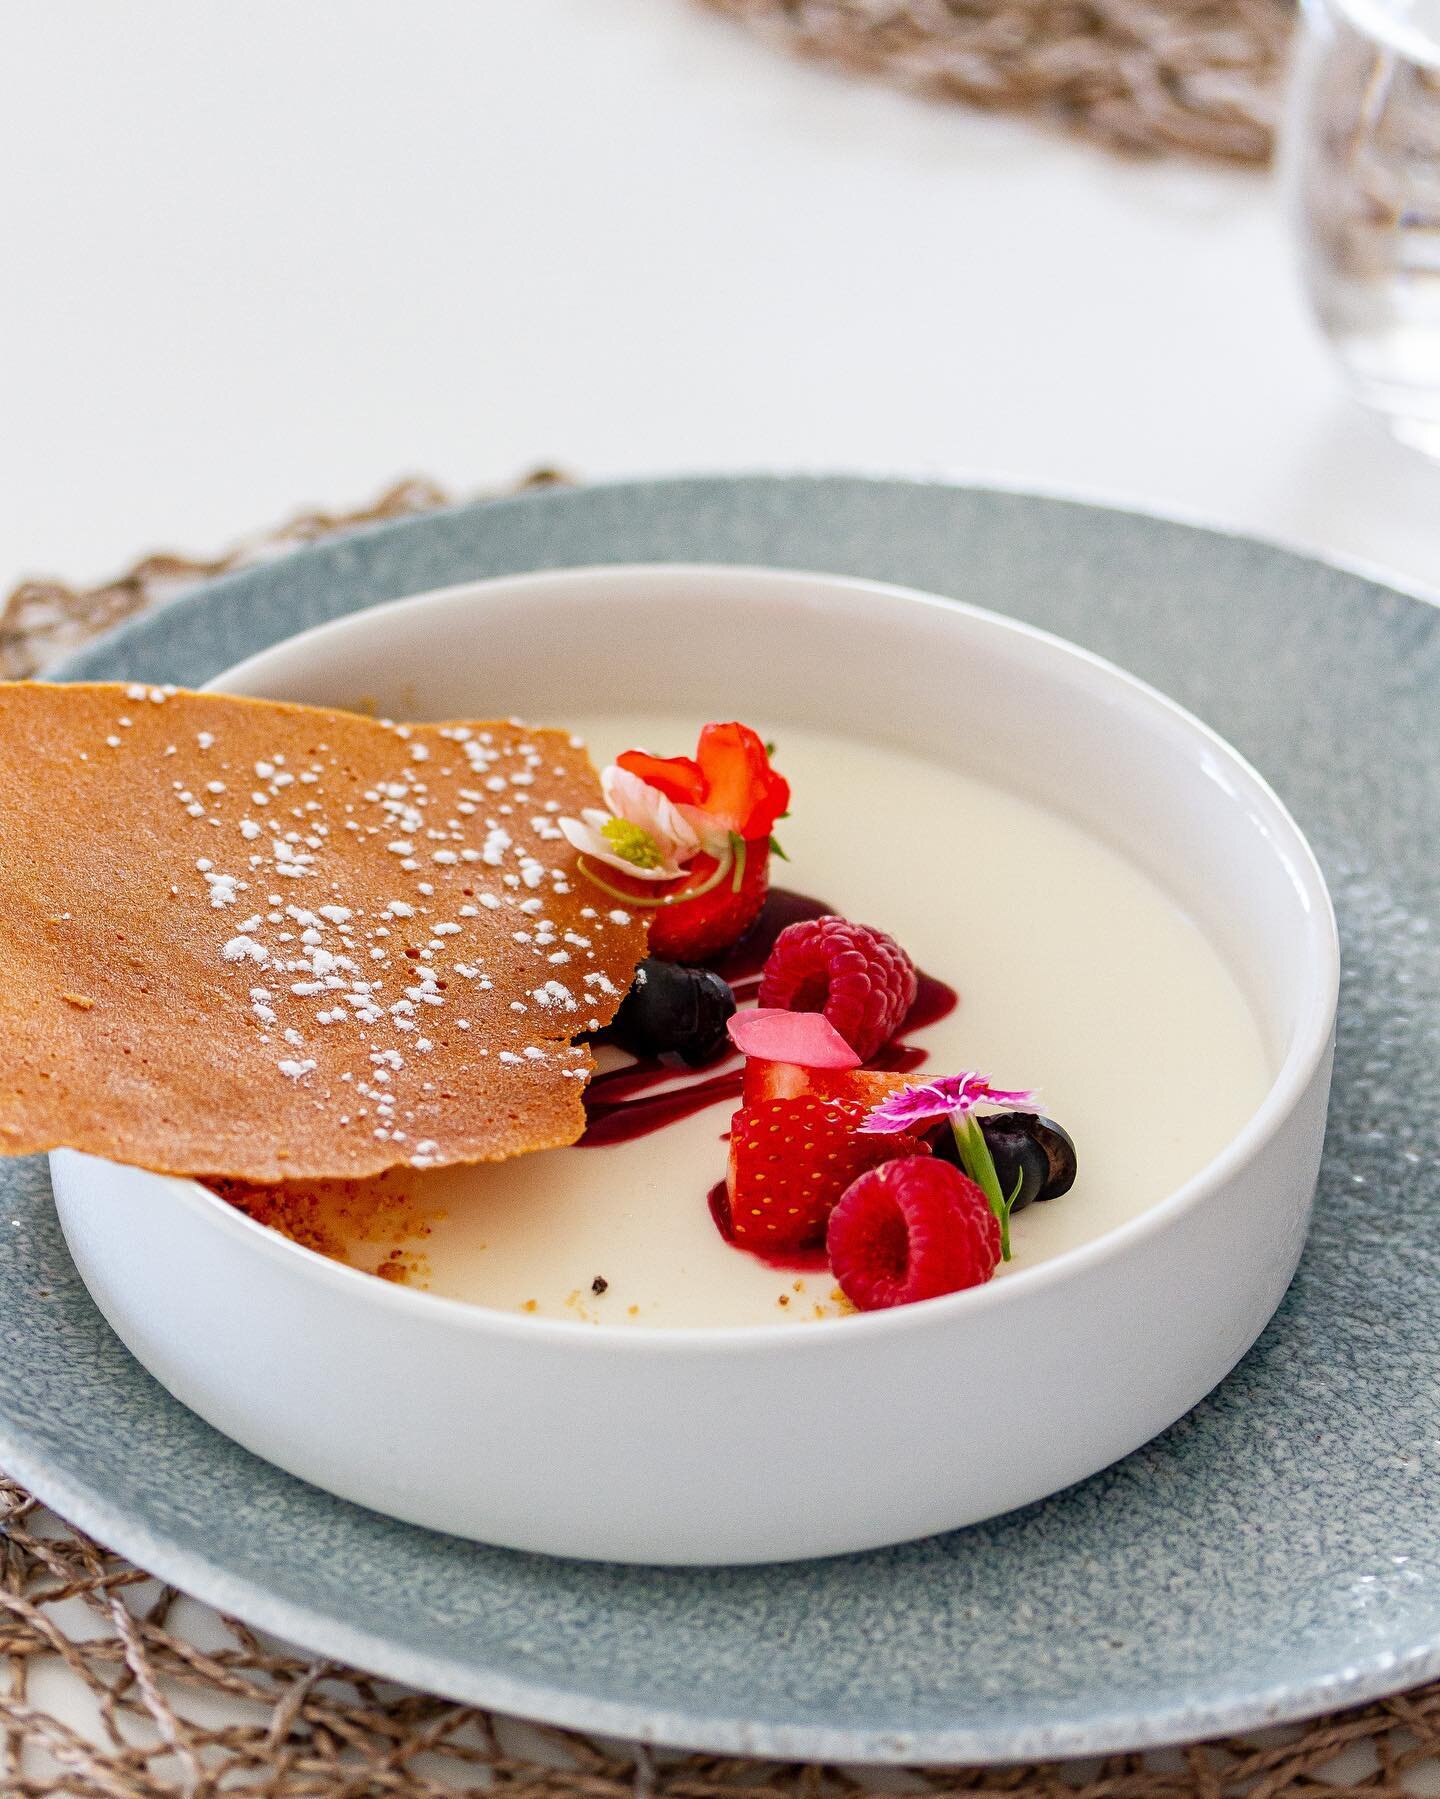 &ldquo;You can't buy happiness, but you can buy dessert and that's kind of the same thing.&rdquo; 
 
Ending on a sweet and memorable note, the Yoghurt Panna Cotta is served with fresh berries, berry coulis, shortbread crumbs and tastes even better (i